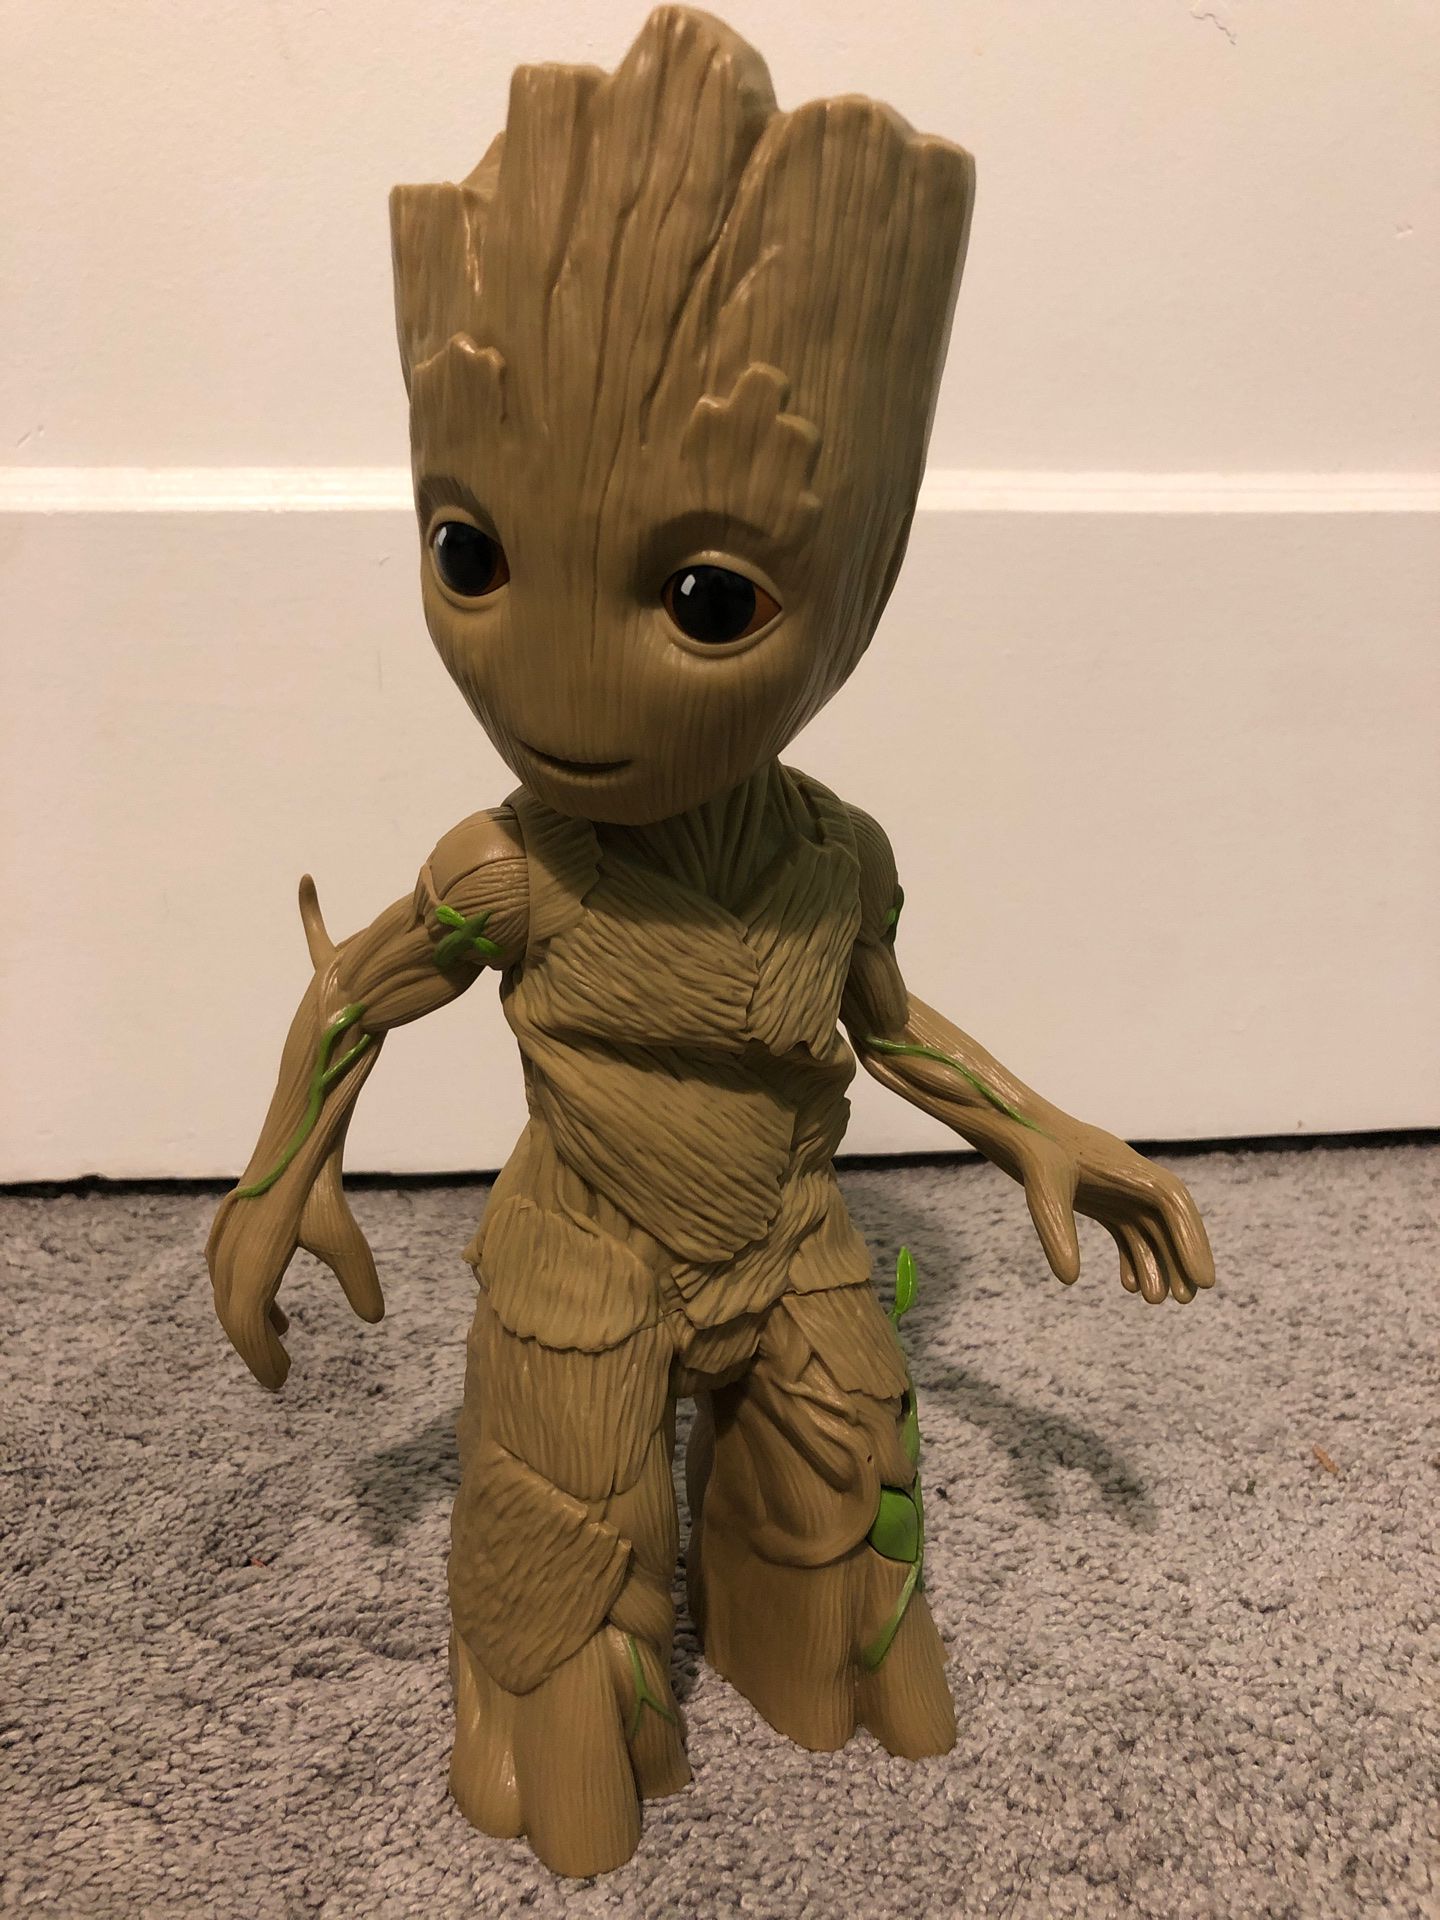 Guardians of the galaxy toy